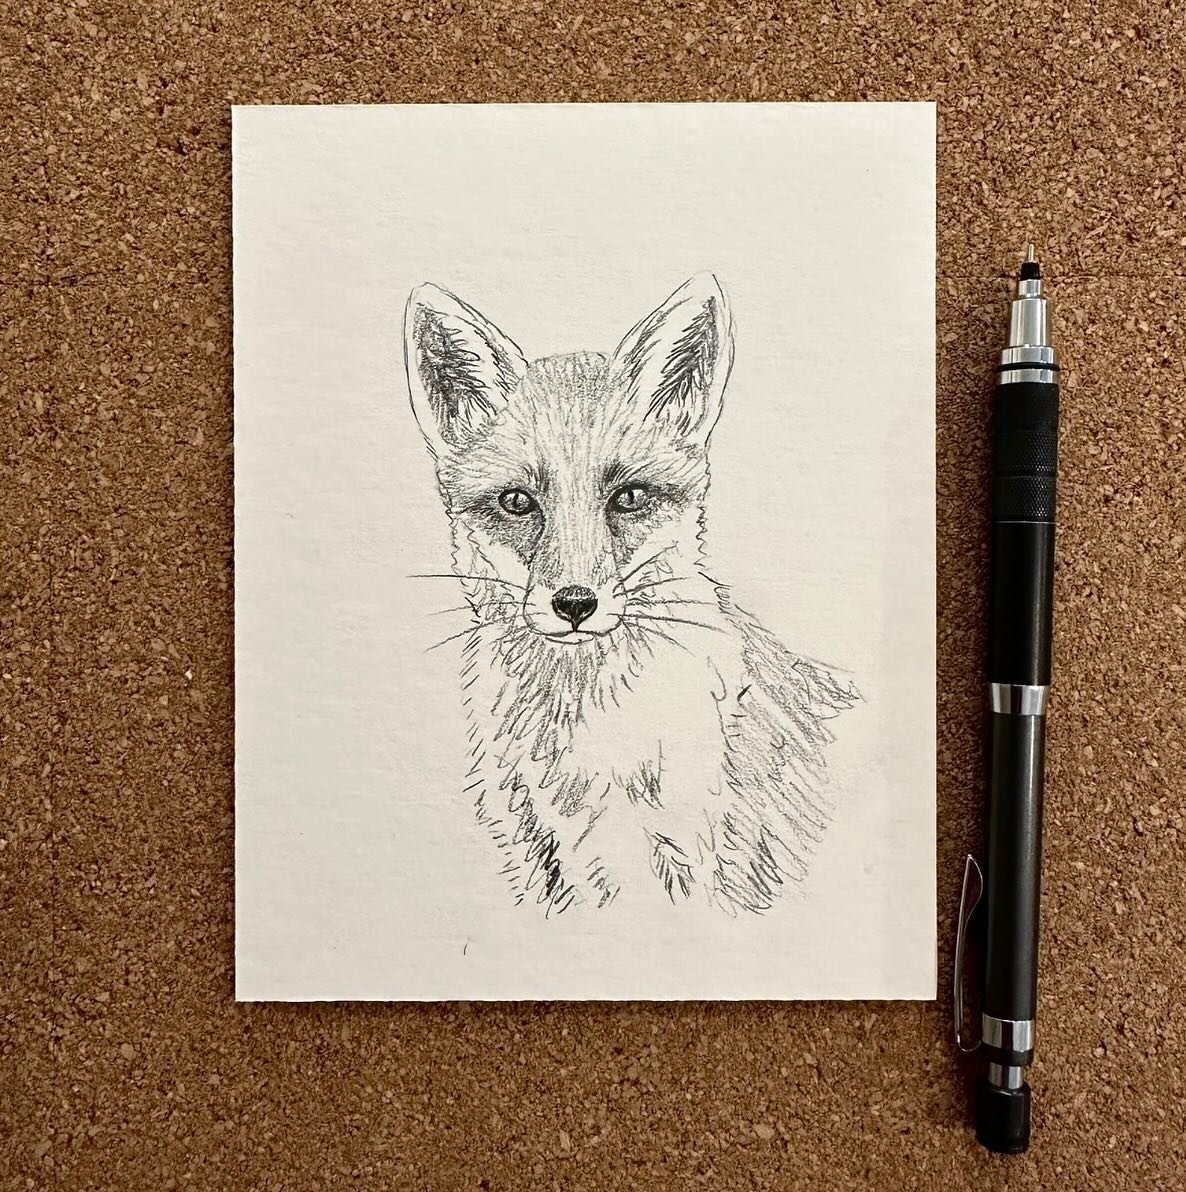 Sketching another fox to hopefully start working on this weekend